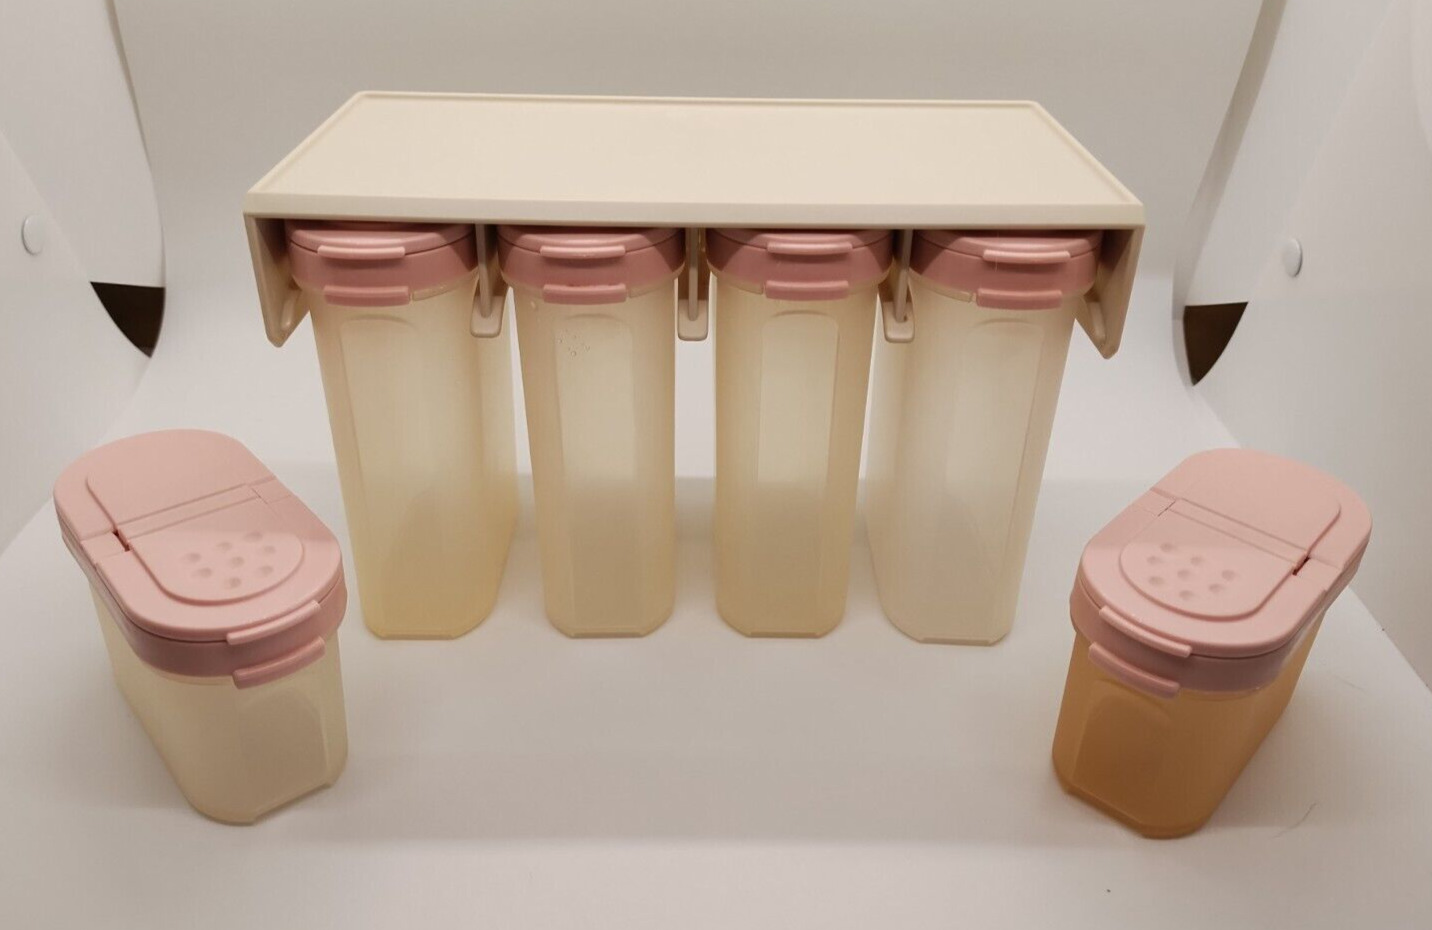 TUPPERWARE PINK USA VINTAGE Hanging Spice Rack 6 Shakers With Lids Modular Mates